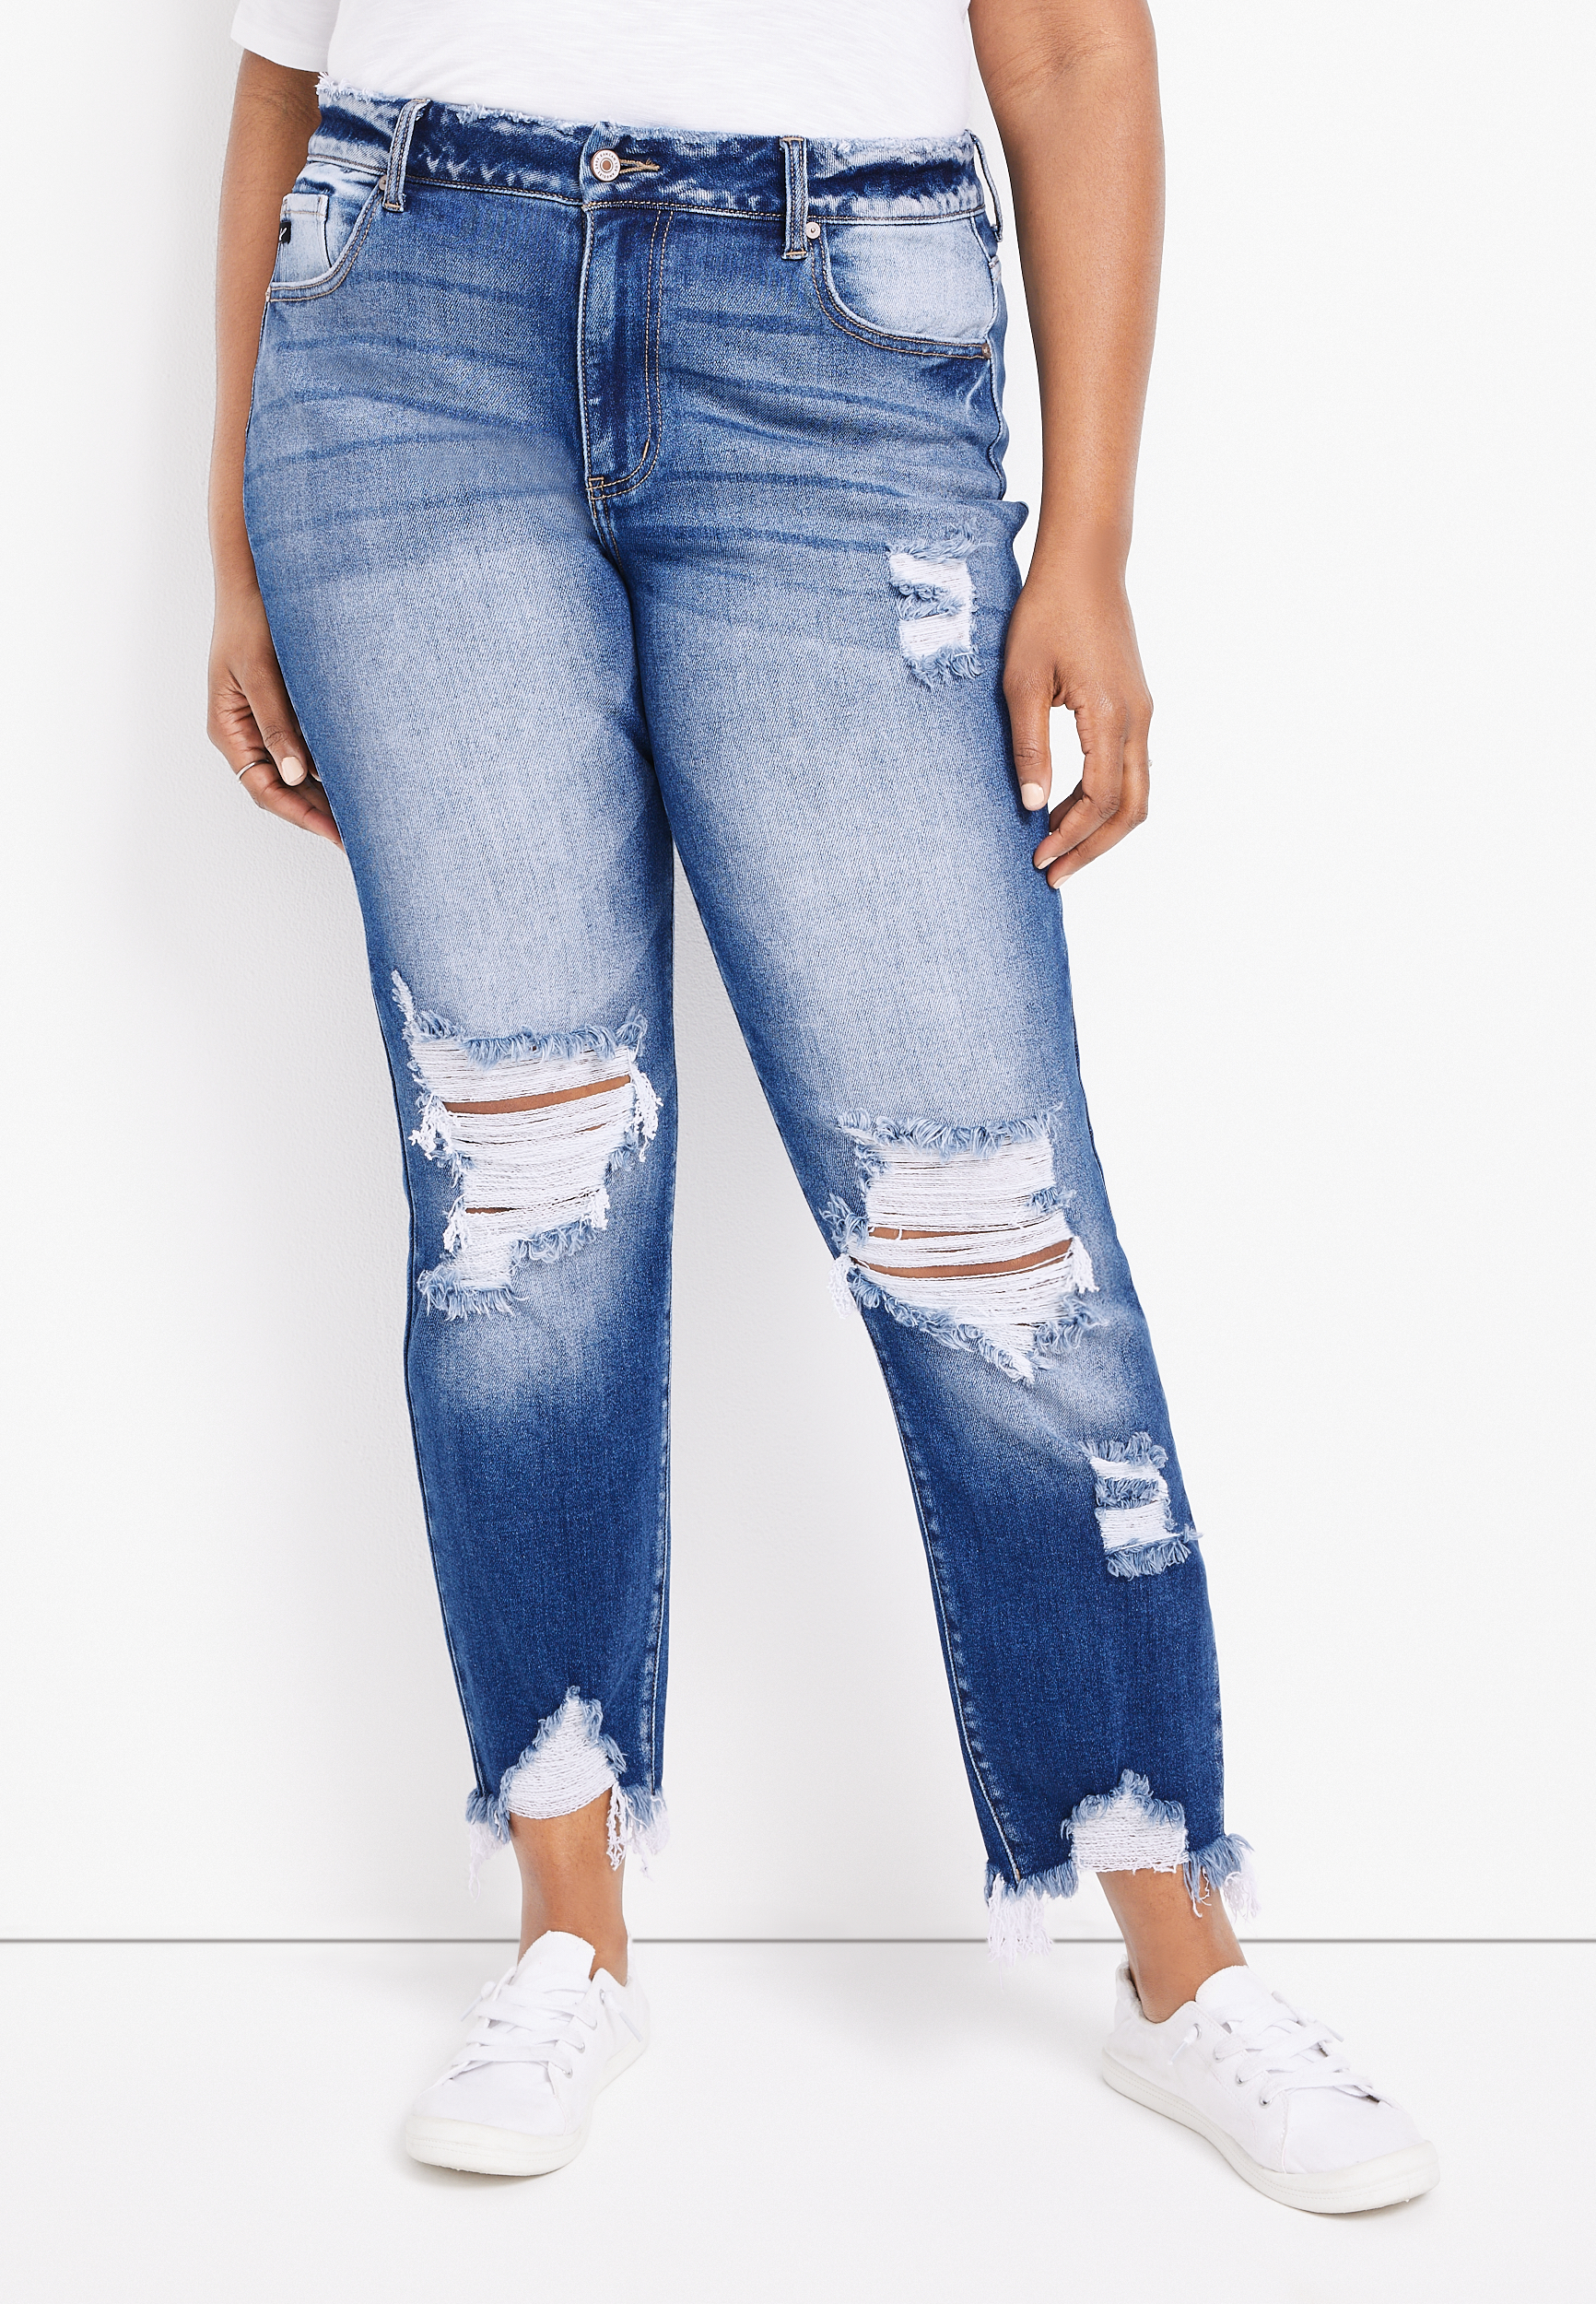 Plus Size KanCan™ Straight High Rise Ripped Jean | maurices